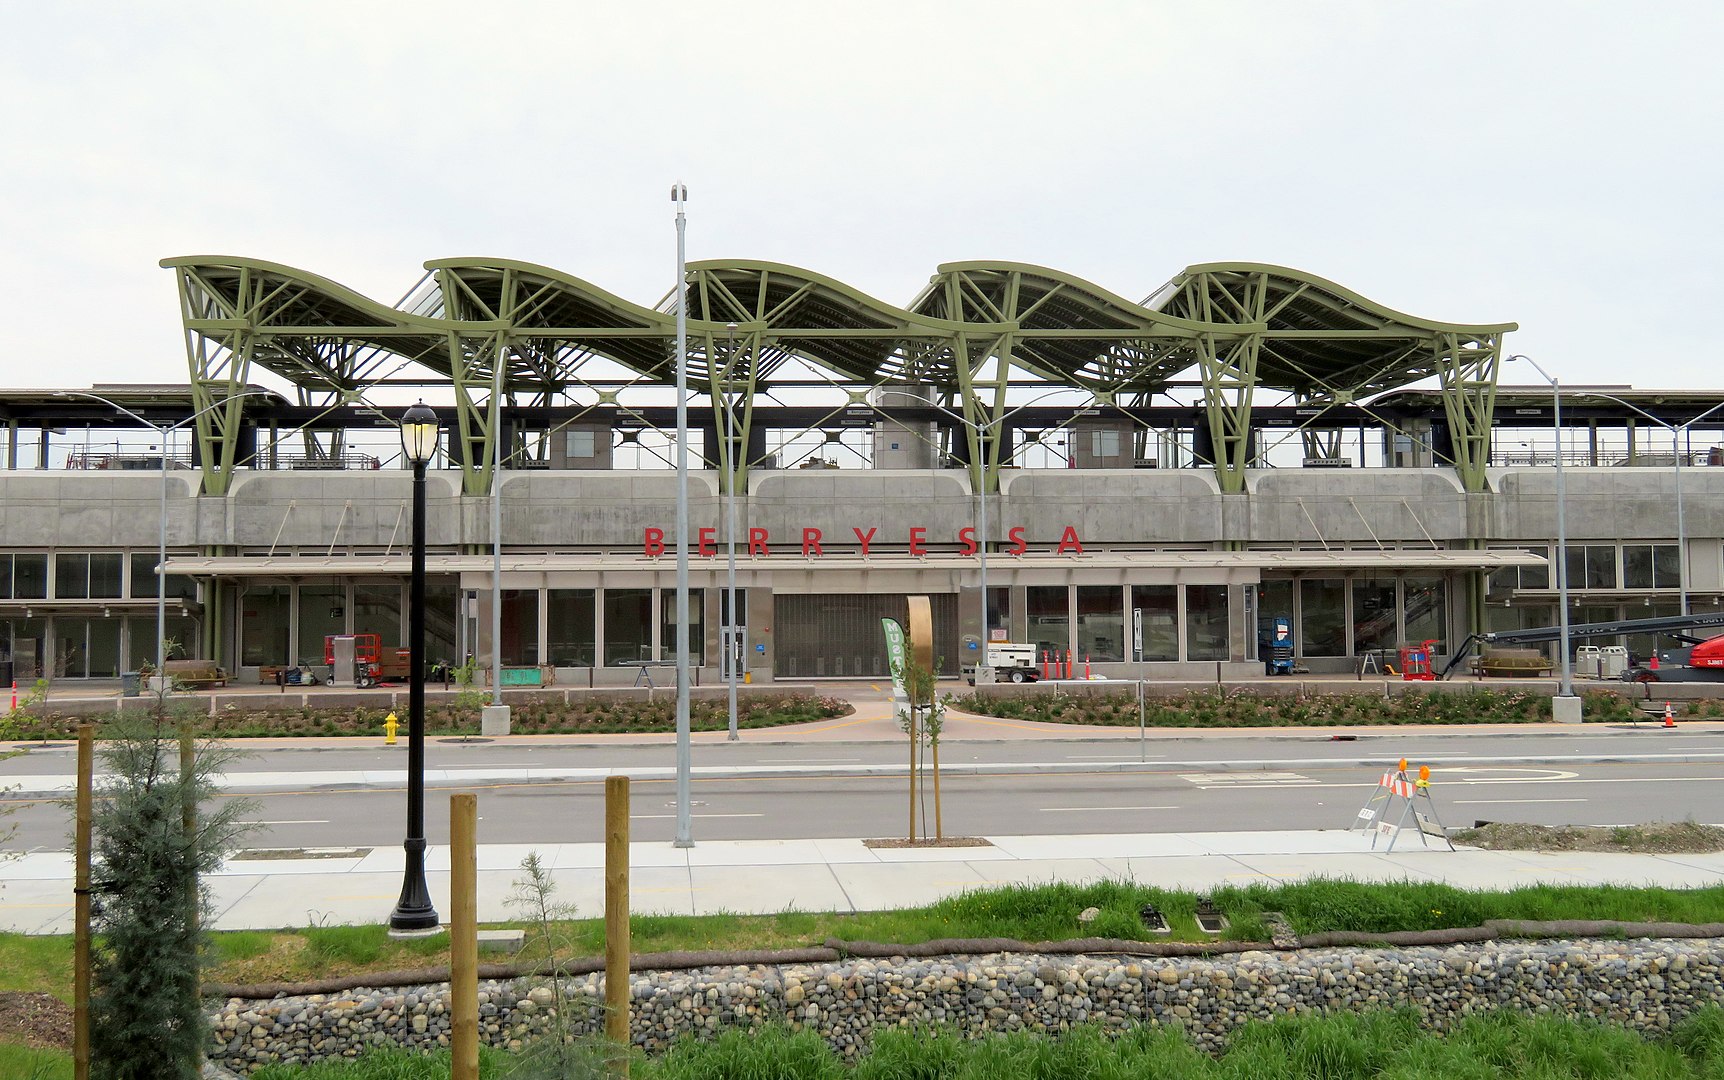 An under-construction train station, with red lettering reading “Berryessa.”